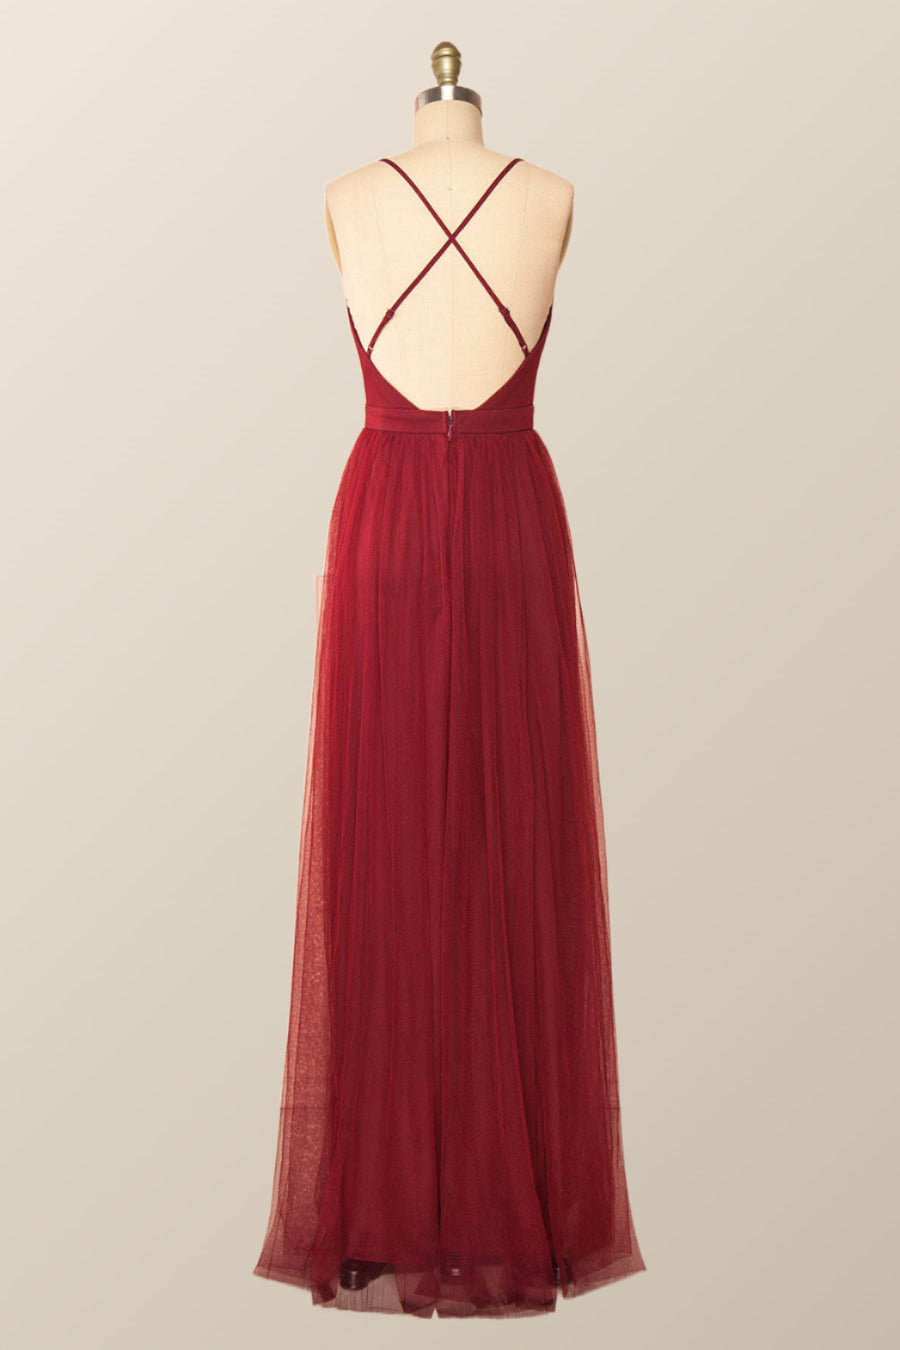 Wine Red Tulle A-line Long Maxi Dress